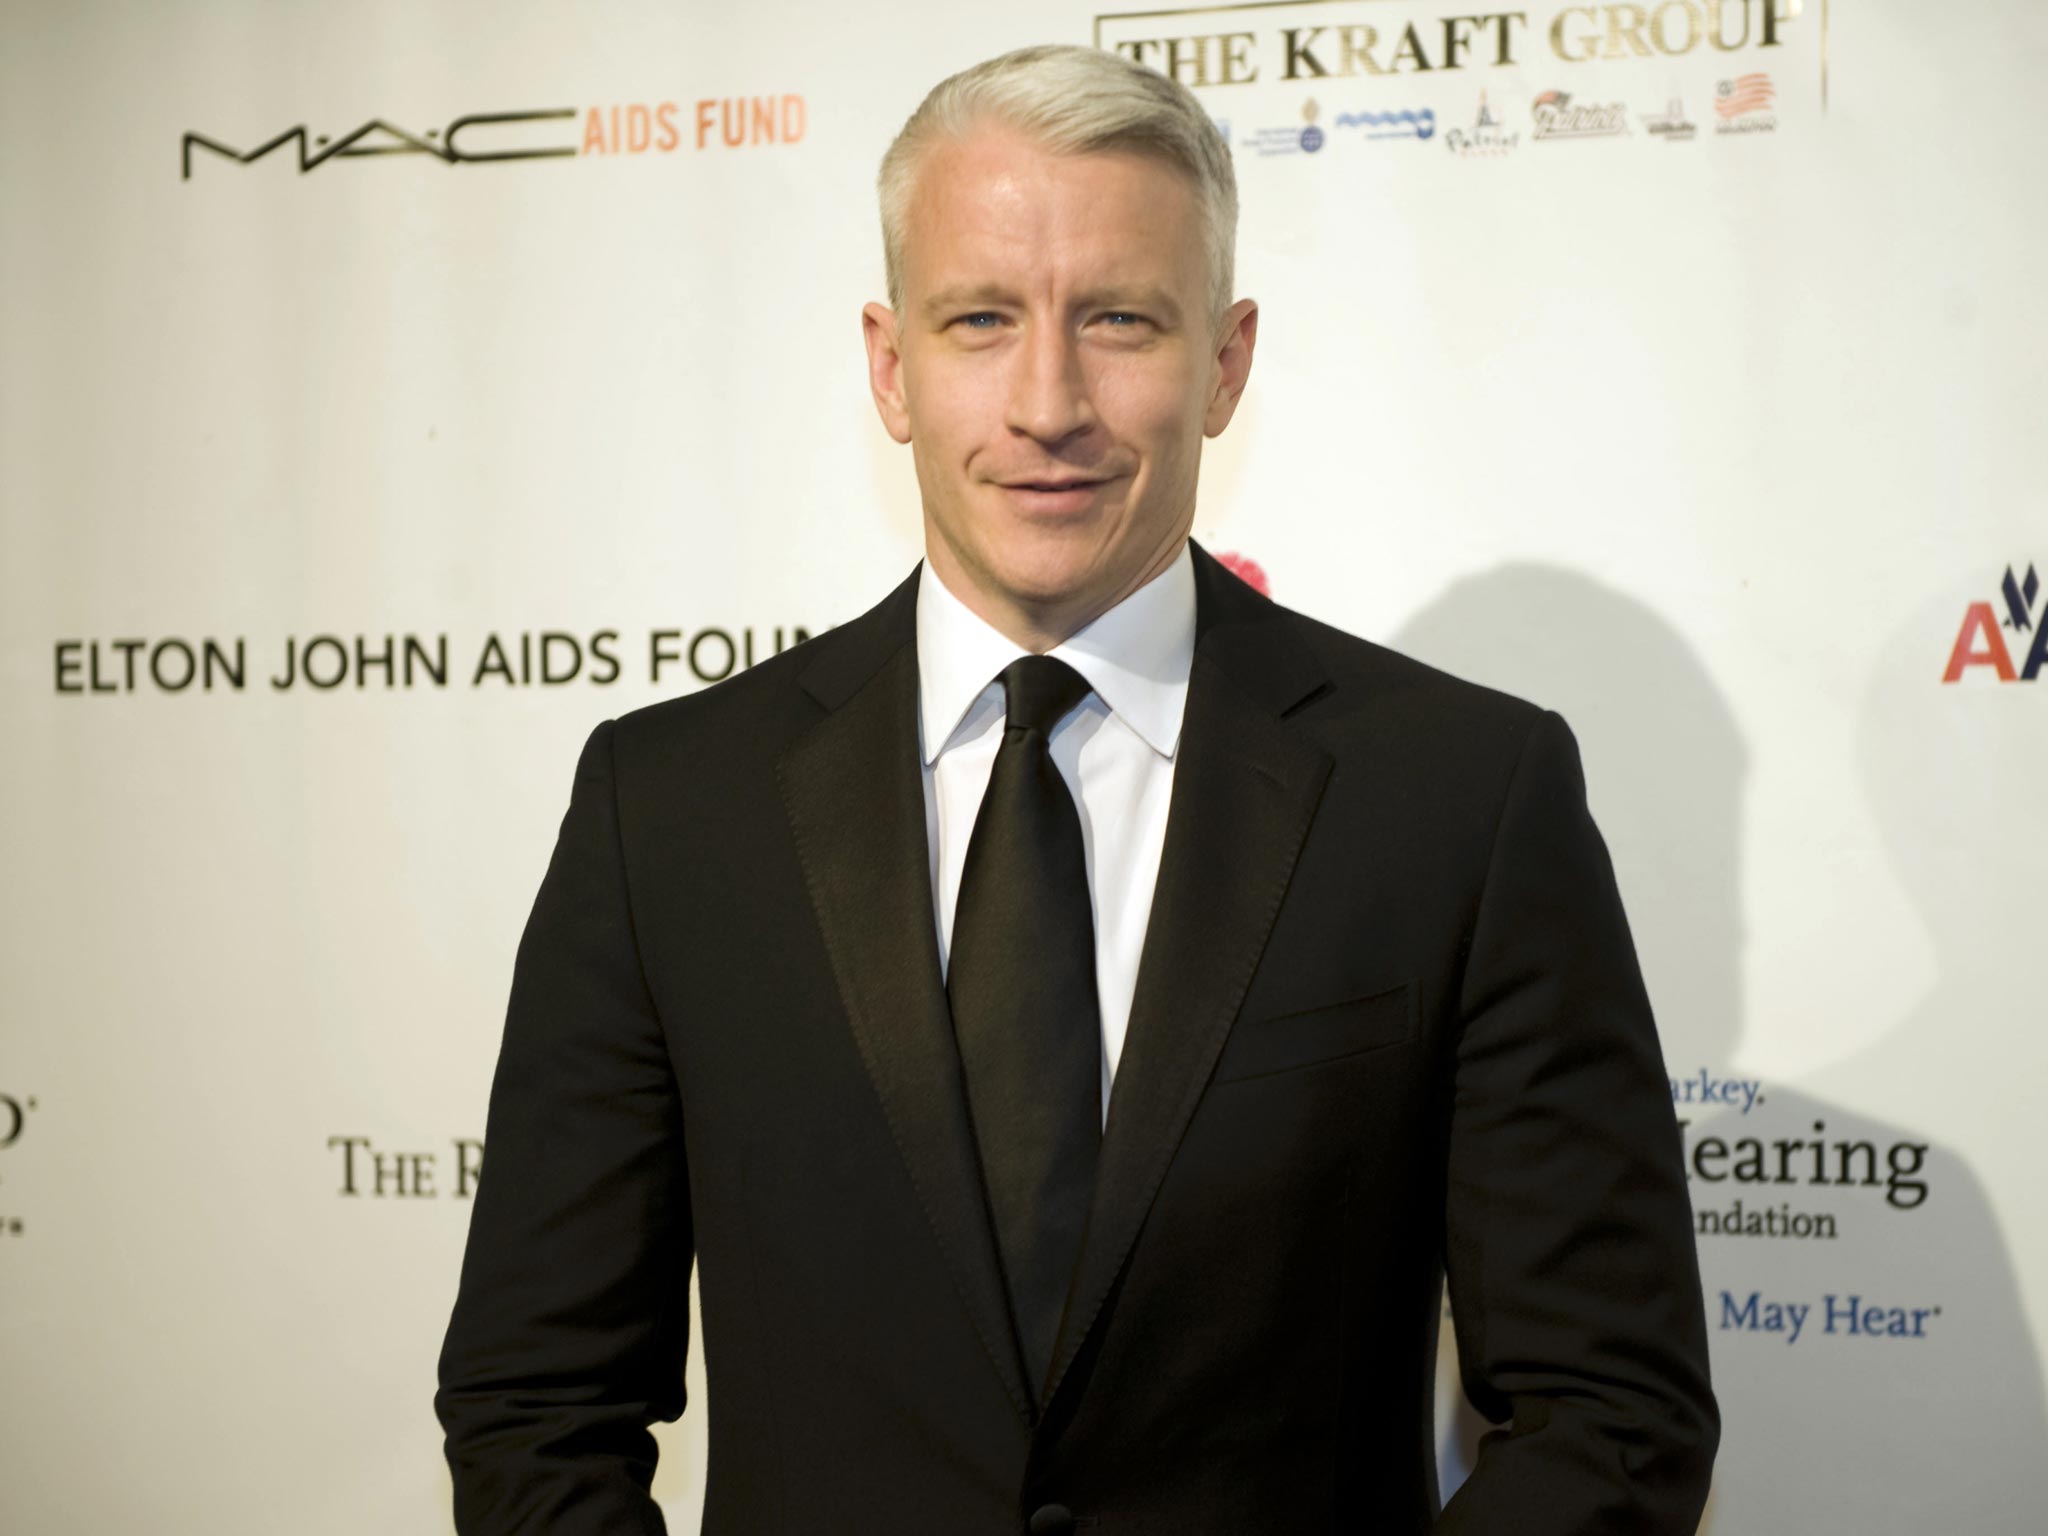 Anderson Cooper @andersoncooper According to the New York Times, the CNN anchor is &#x201c;the most prominent openly gay journalist on American television&#x201d; since coming out in an open letter last summer[2012]. &#x201c;The fact is, I'm gay, always have been, always will be, and I couldn&#x2019;t be any more happy, comfortable with myself, and proud&#x201d;, he wrote.